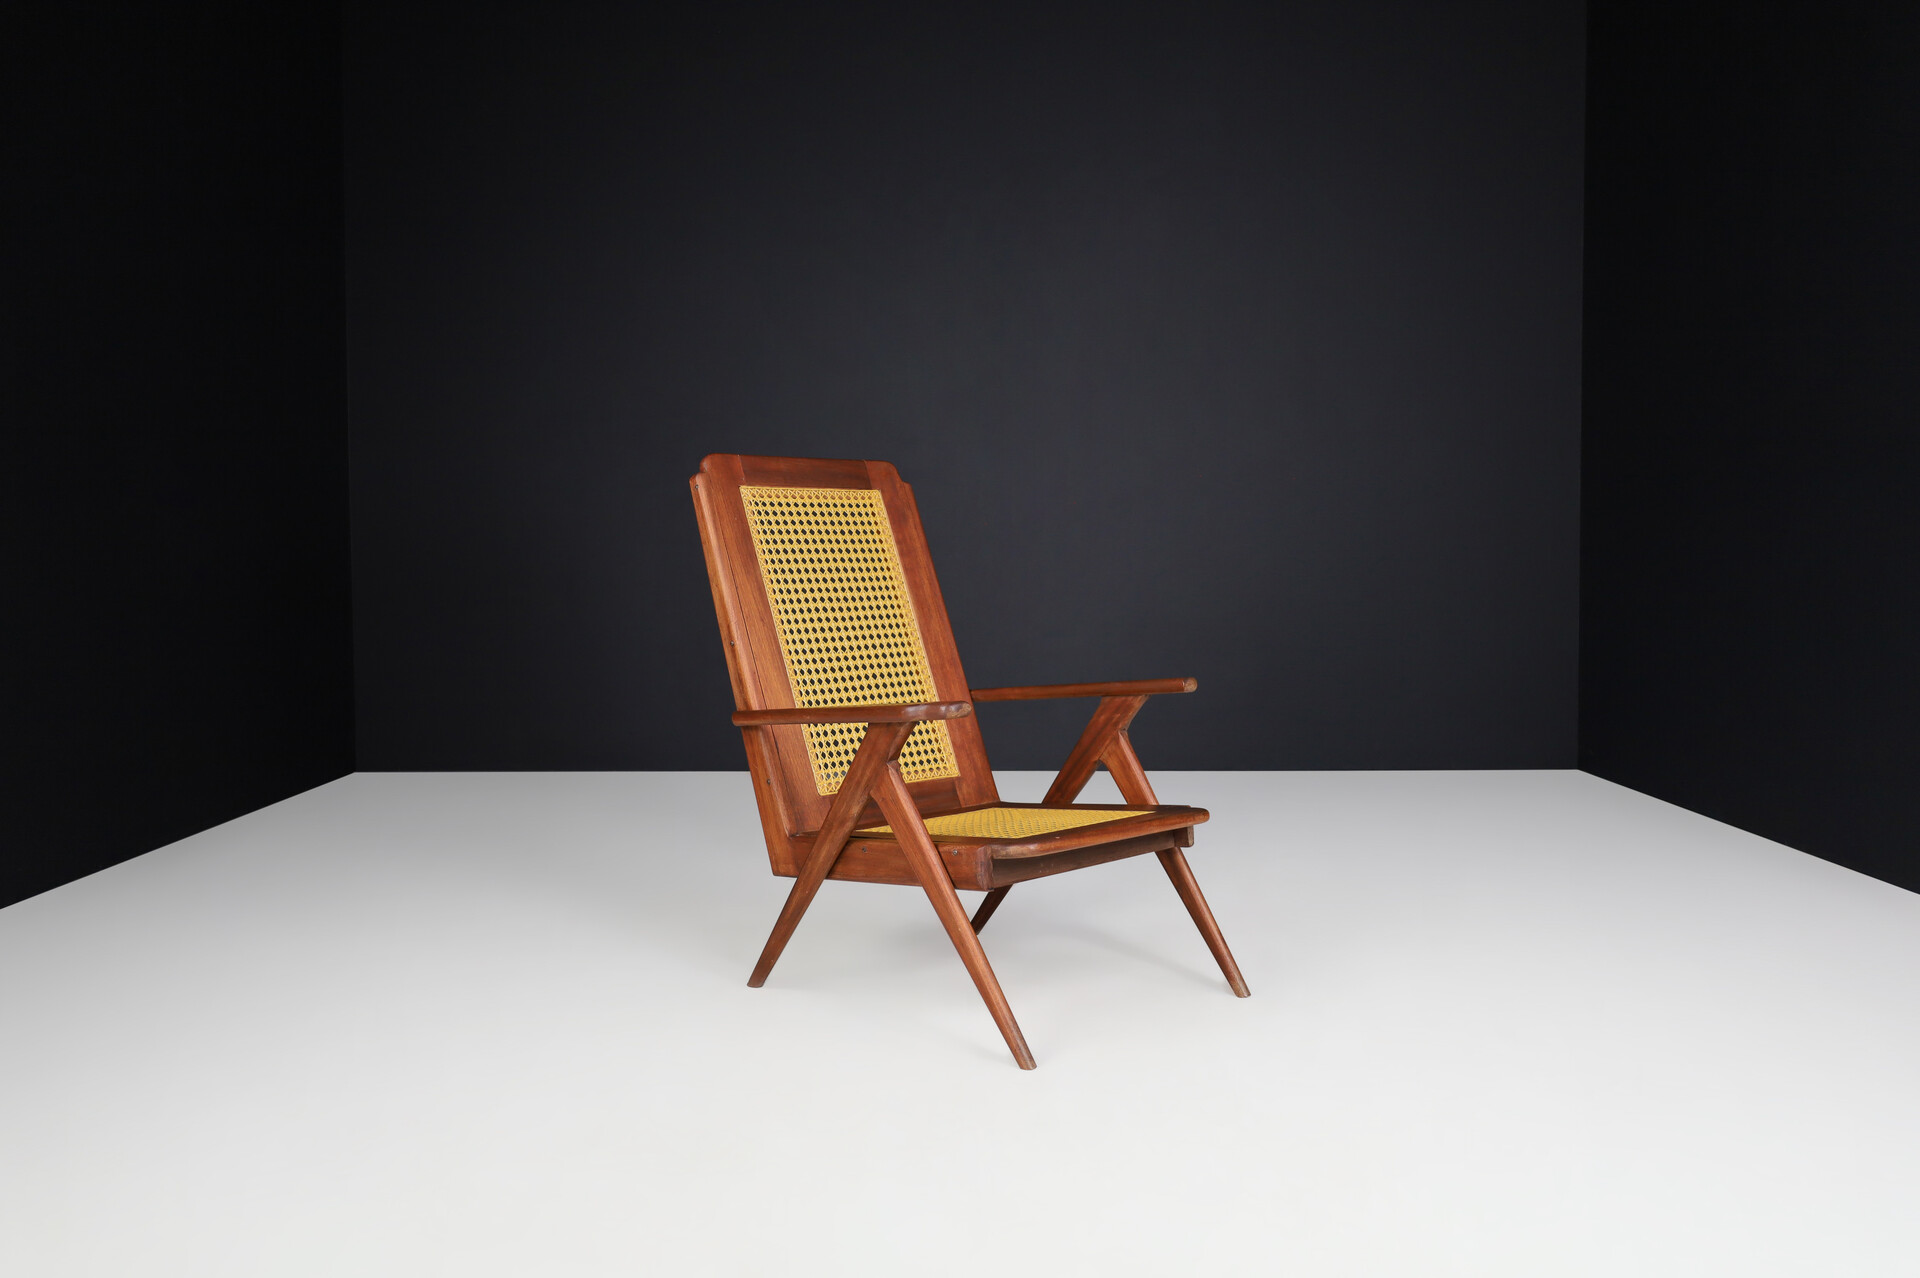 Mid century modern Lounge Chairs with mahogany Structure and Webbing in the style of Pierre Jeanneret , France, 1950s Mid-20th century